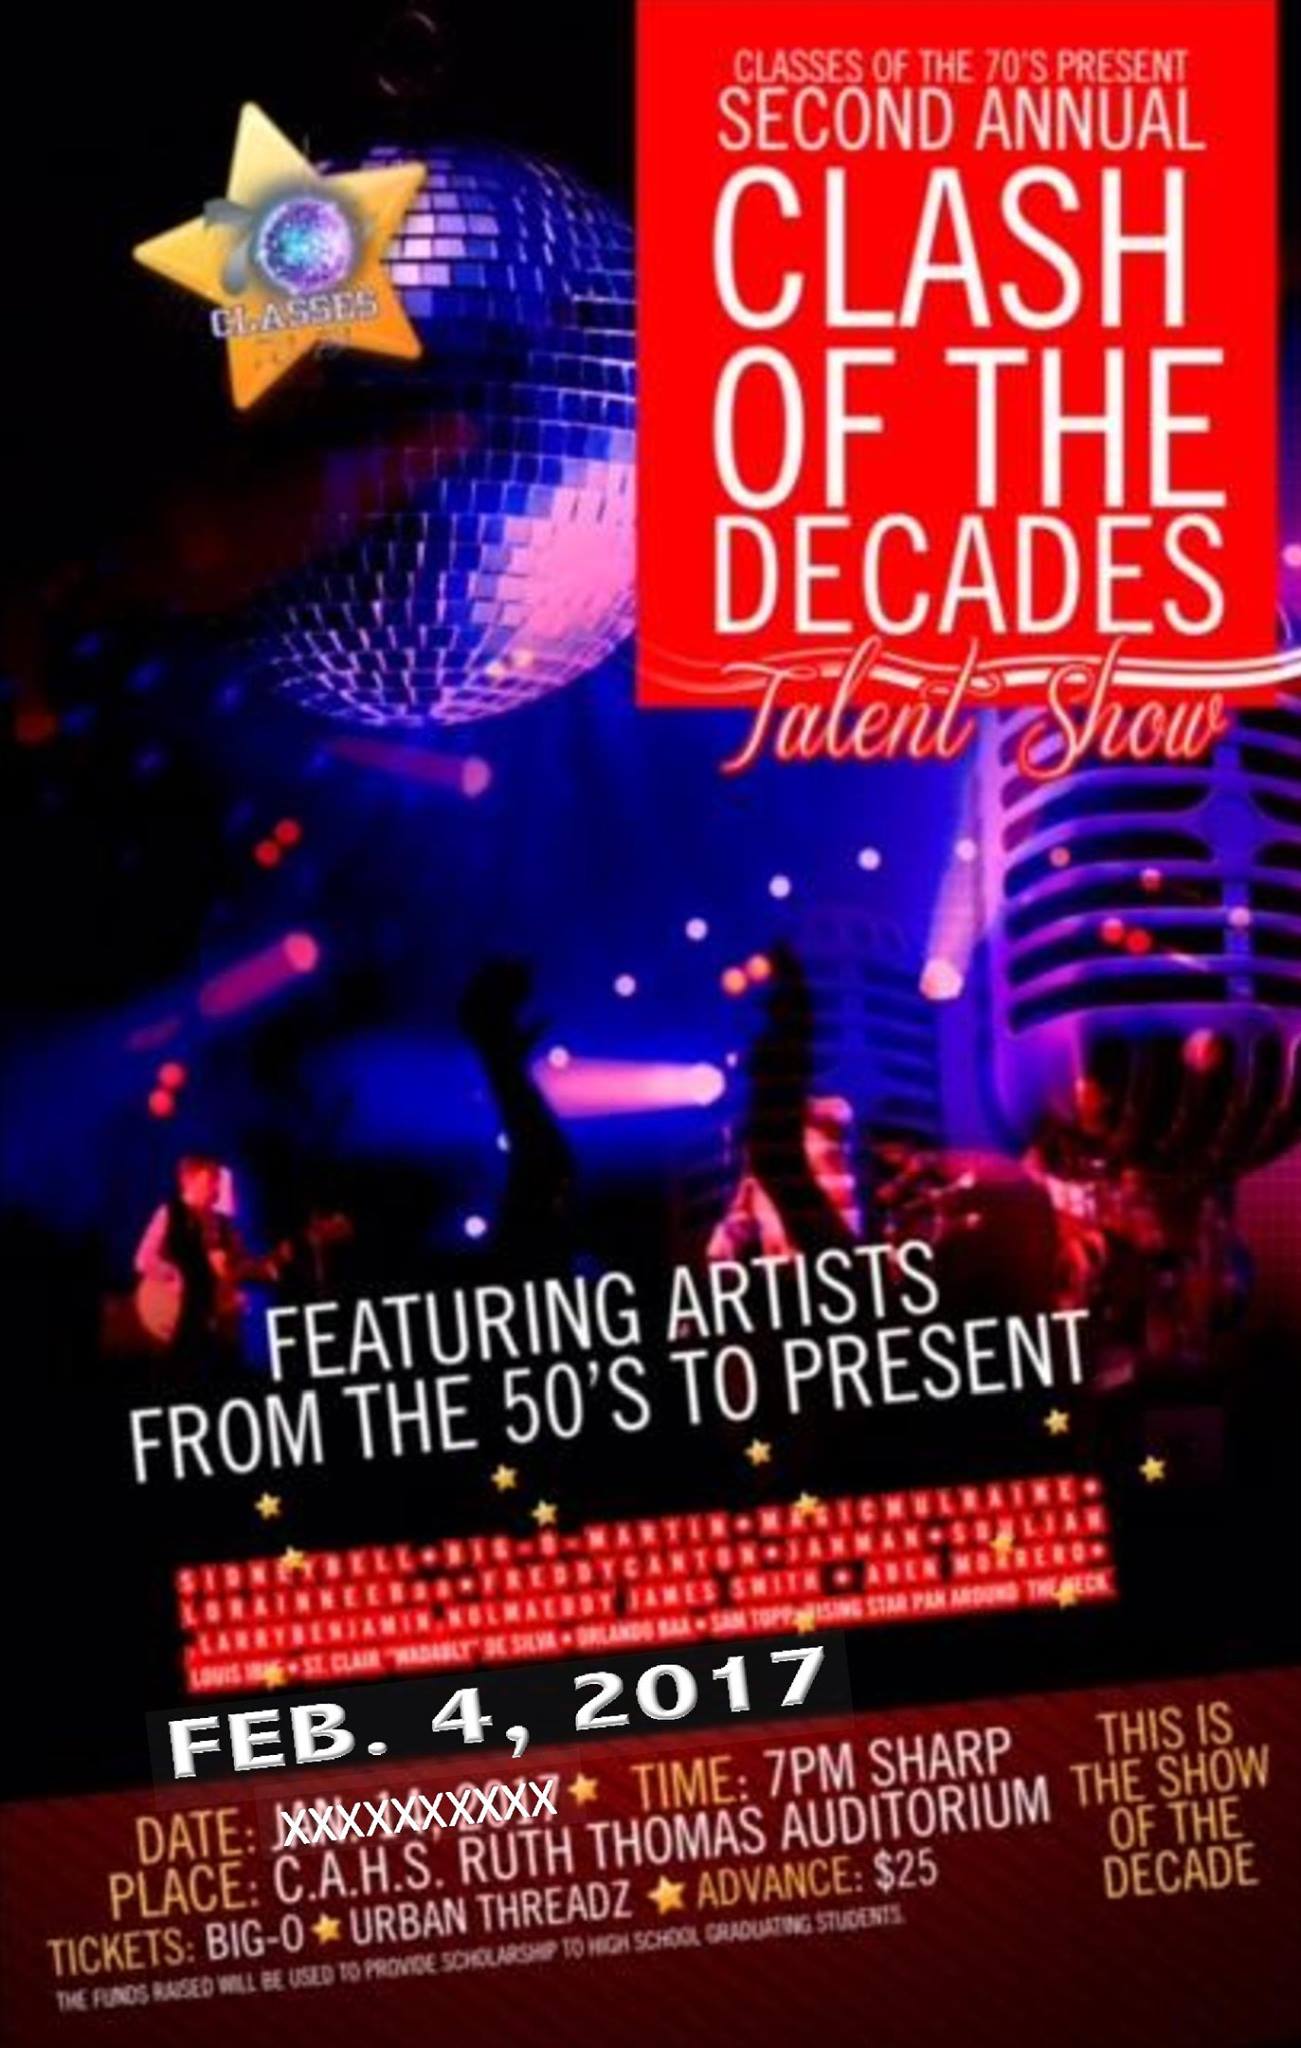 Classes of the 70s to host 2nd Clash of the Decades Talent Show Feb. 4